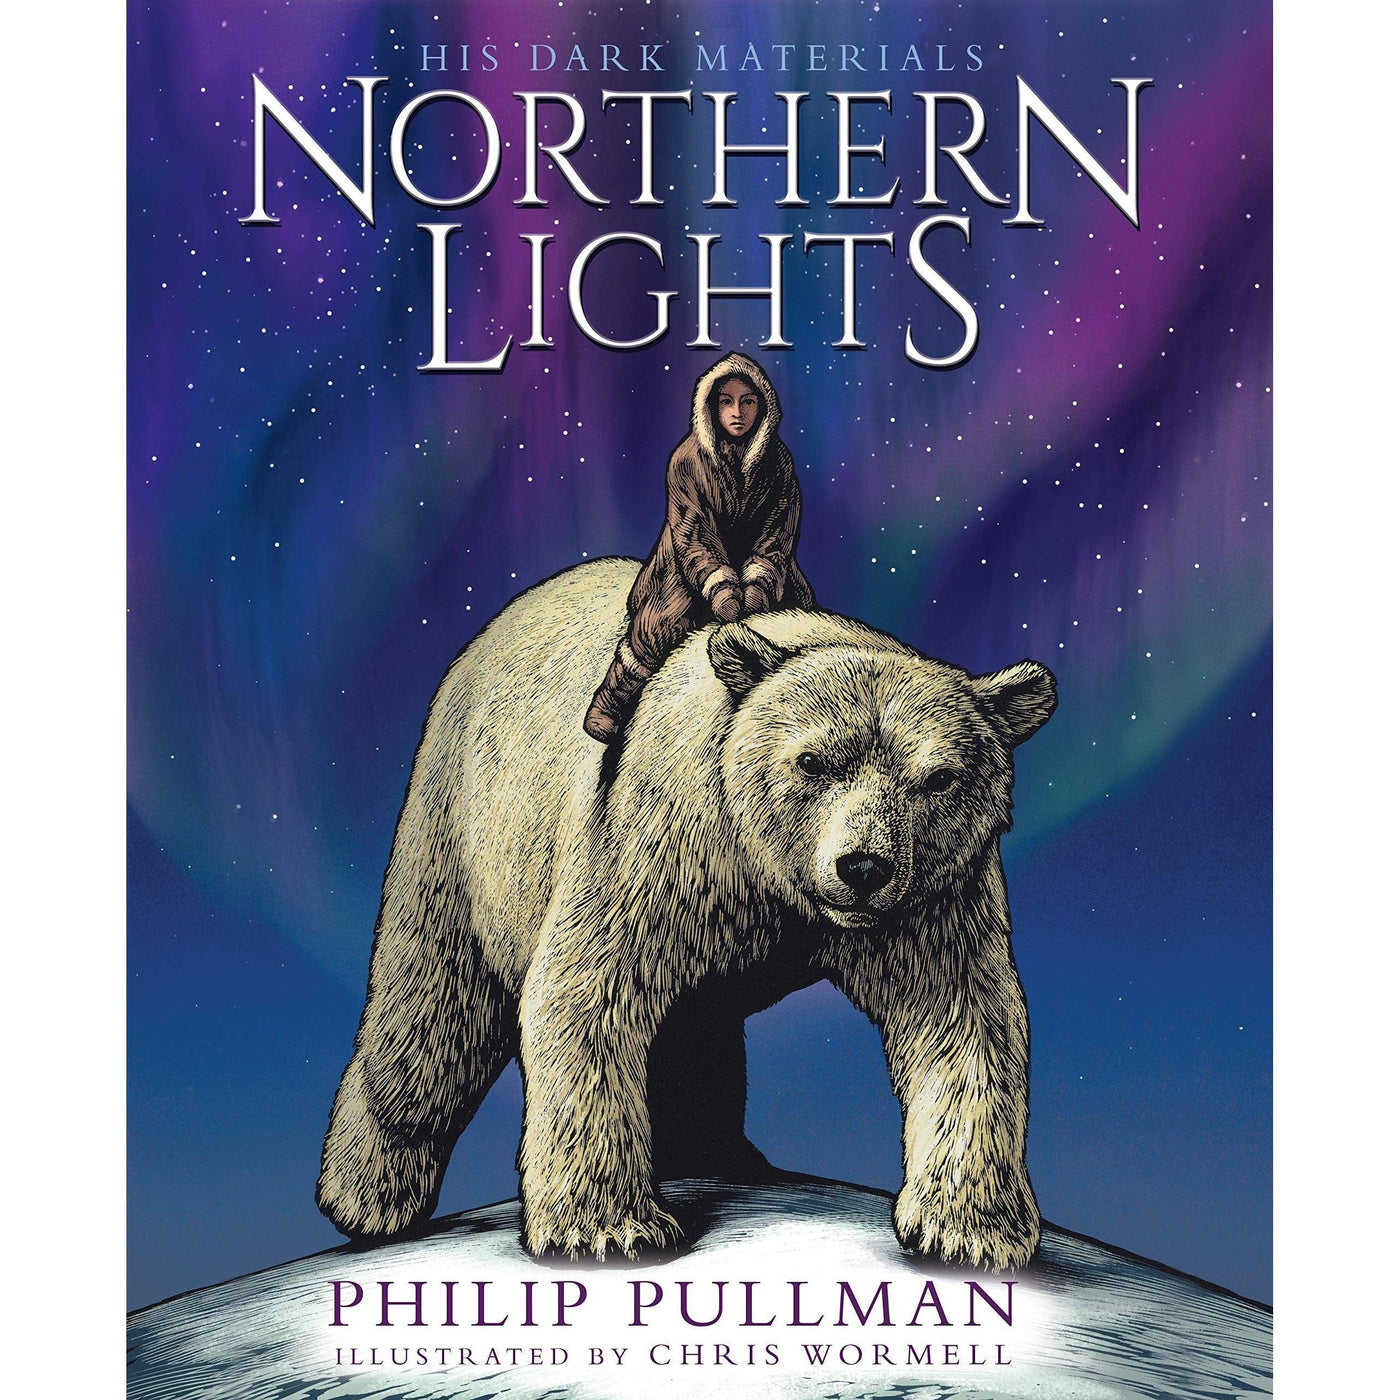 Northern Lights: The Illustrated Edition